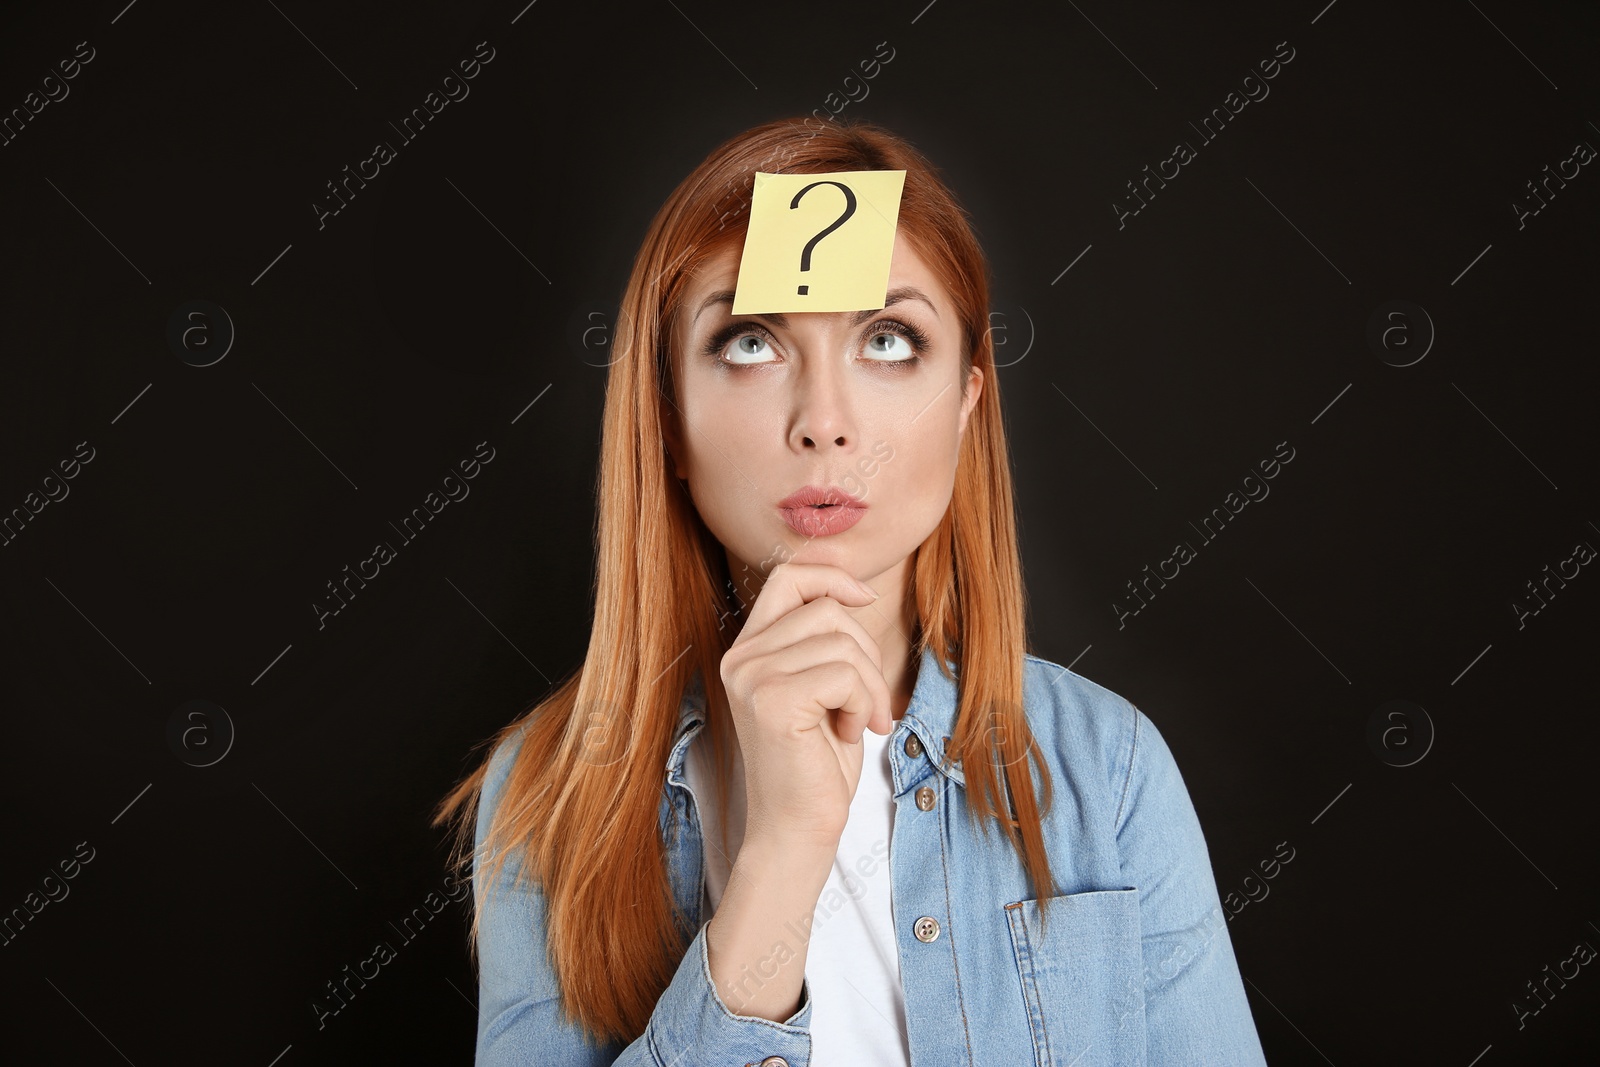 Photo of Pensive woman with question mark sticker on forehead against black background